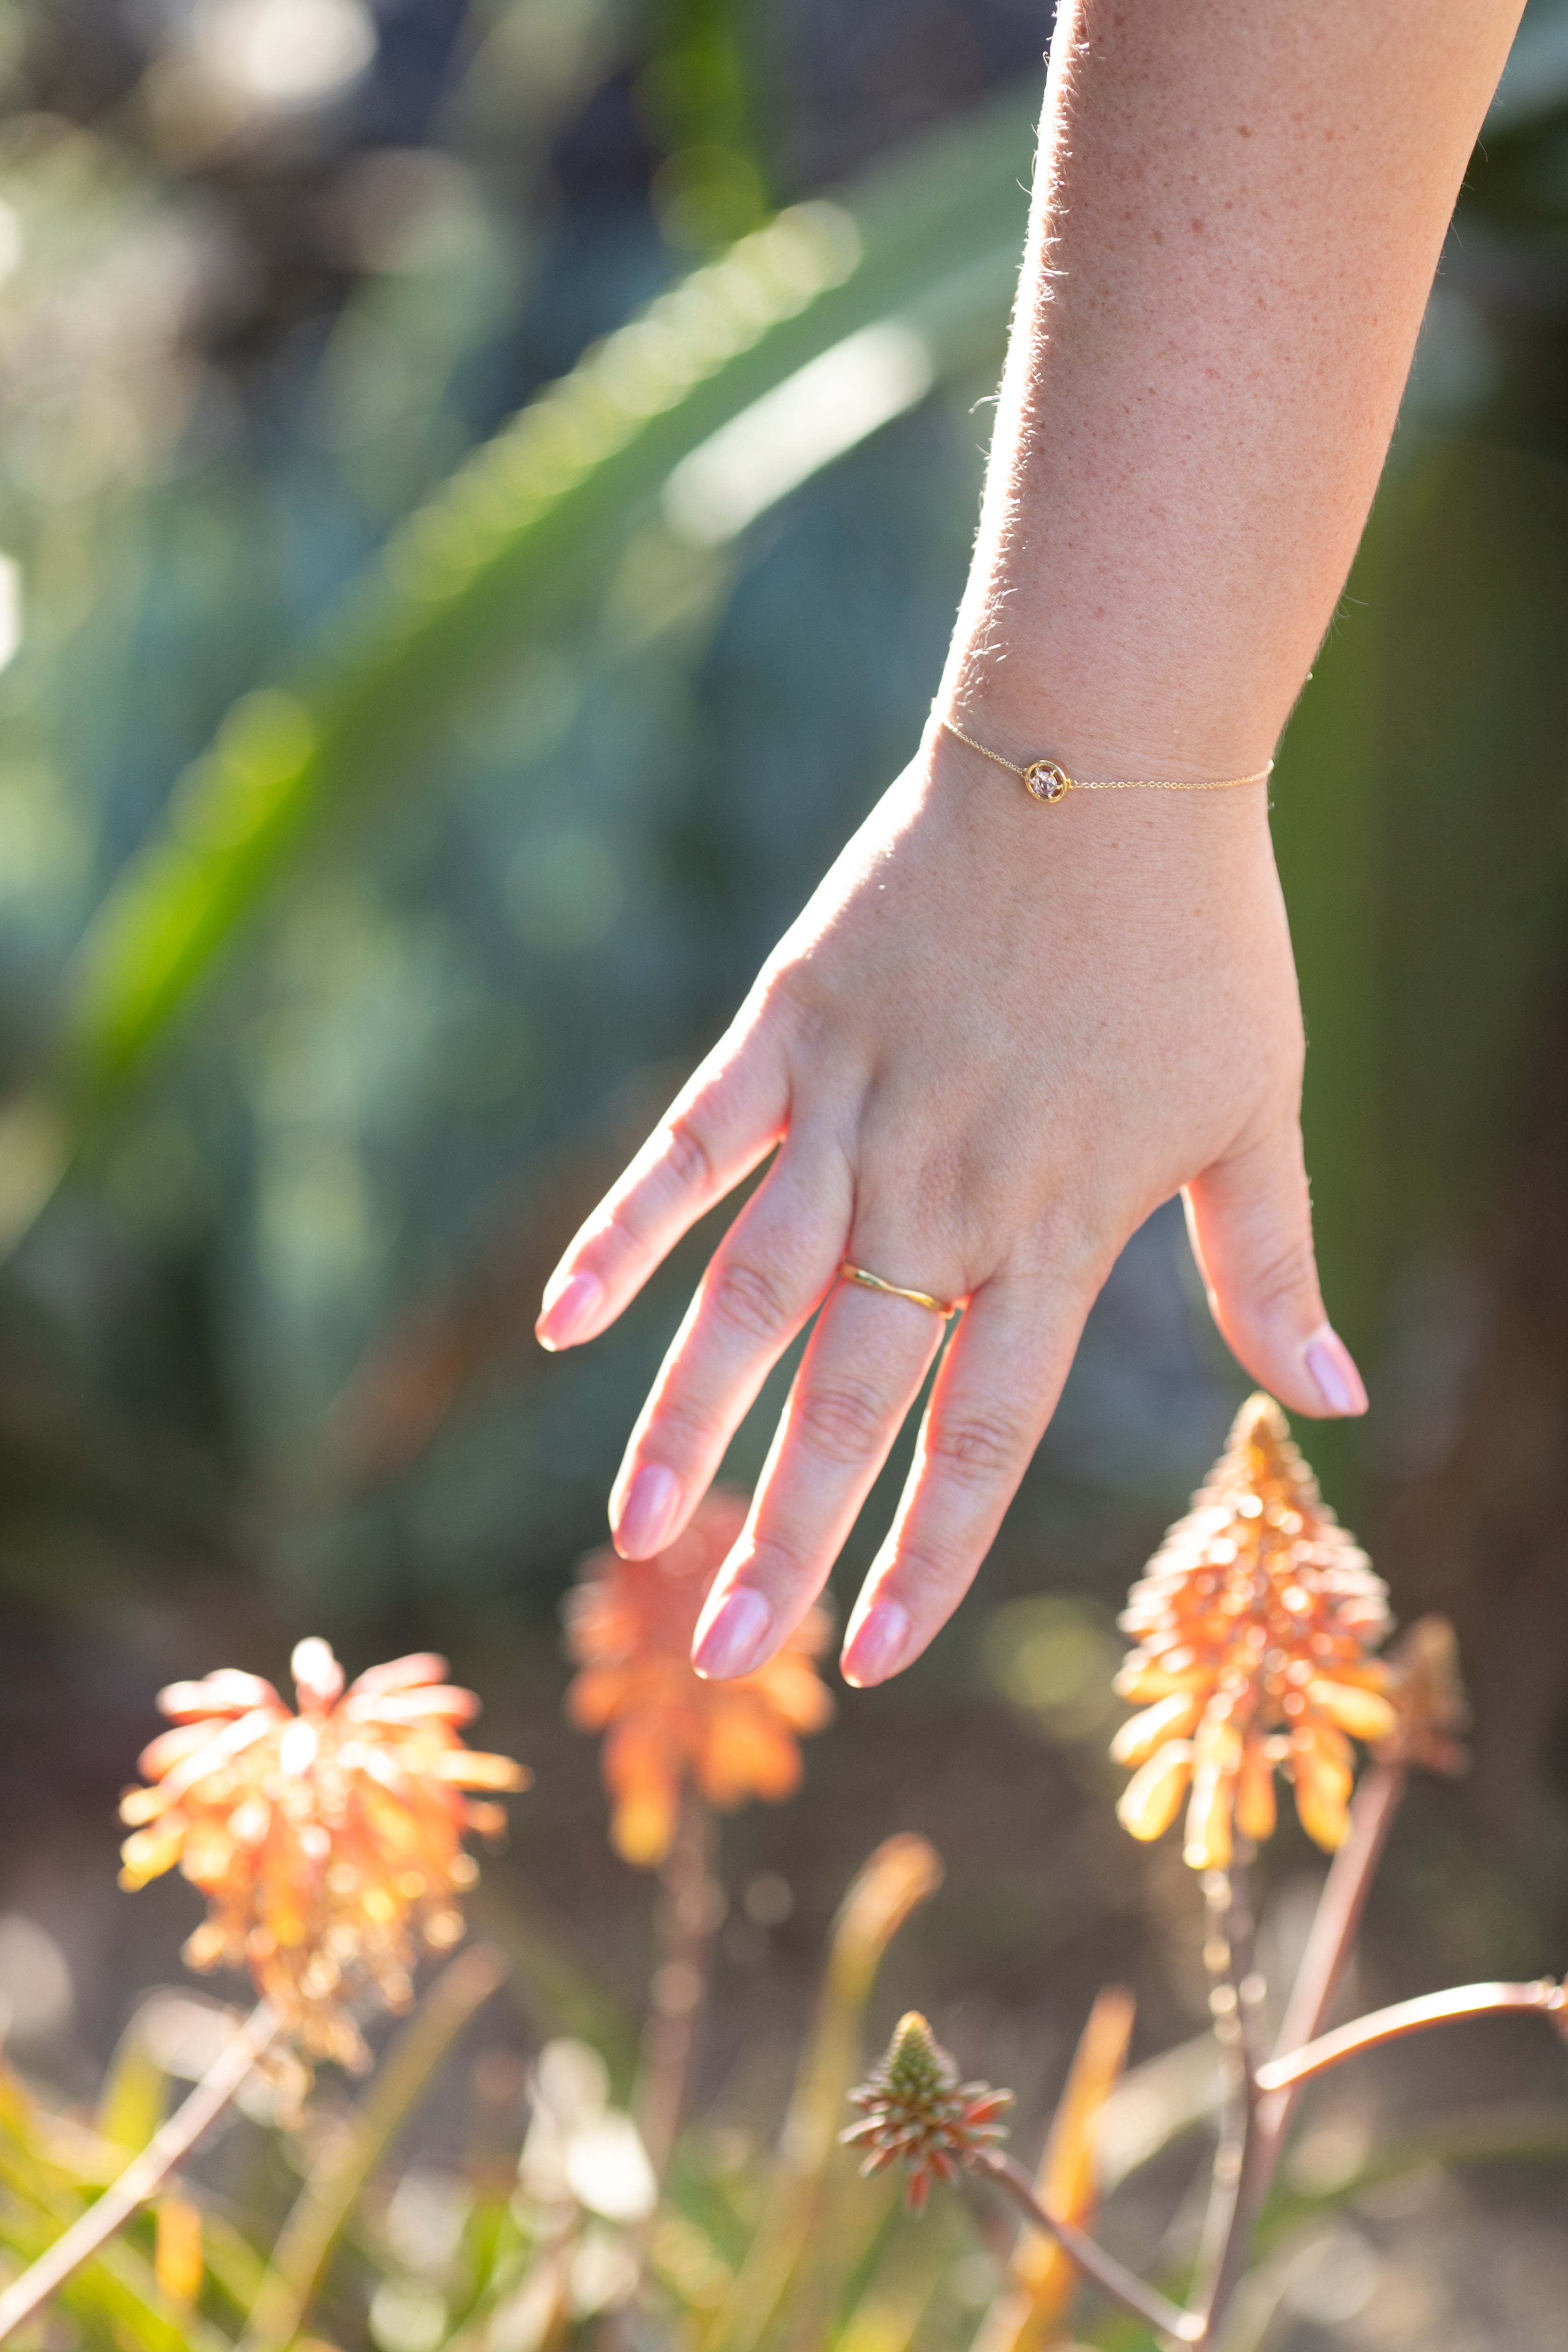 A shot of a plus size woman's hand in front of orange flowers wearing the gemstone bracelet in gold and spinel styled with a simple gold twist ring on her middle finger.